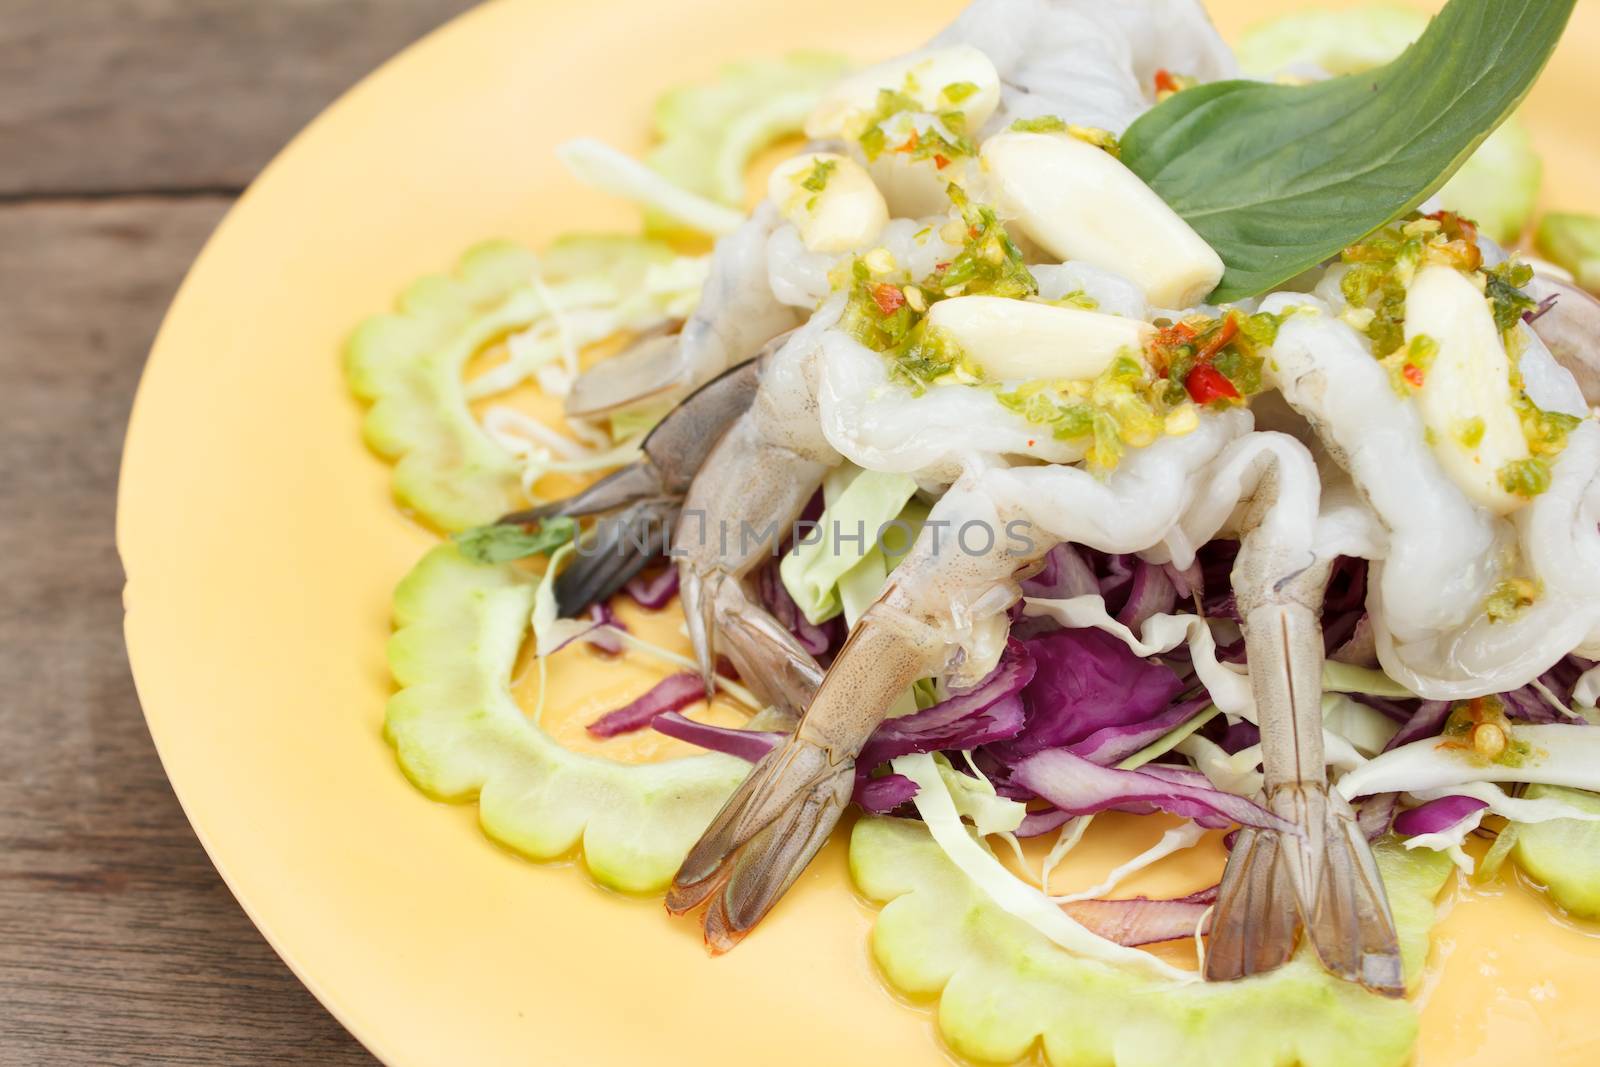 raw prawns in spicy sauce - Thai food  by vitawin